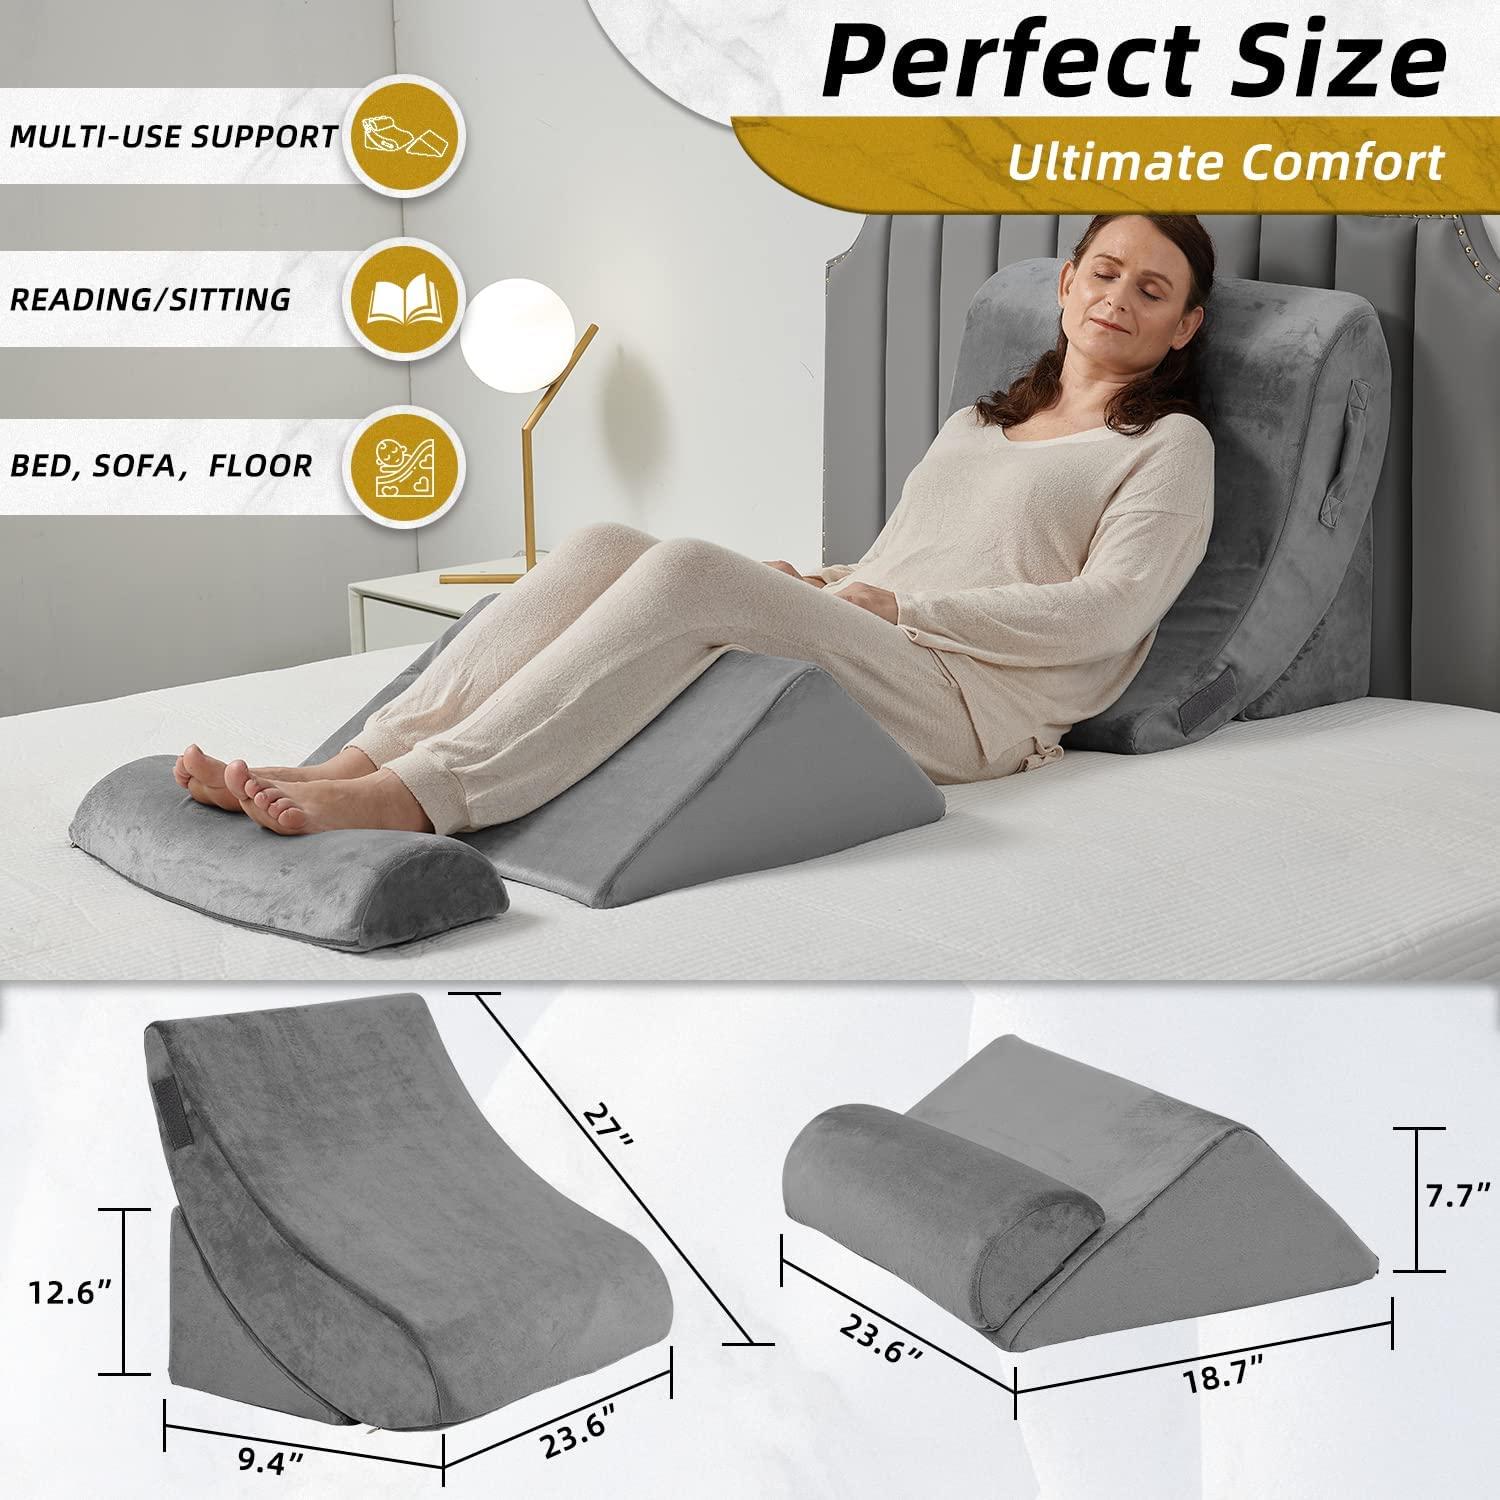 Bed Wedge Pillow, Unique Curved Design for Multi Position Use, Memory  Foam Wedge Pillow for Sleeping, Works for Back Support, Leg, Knee